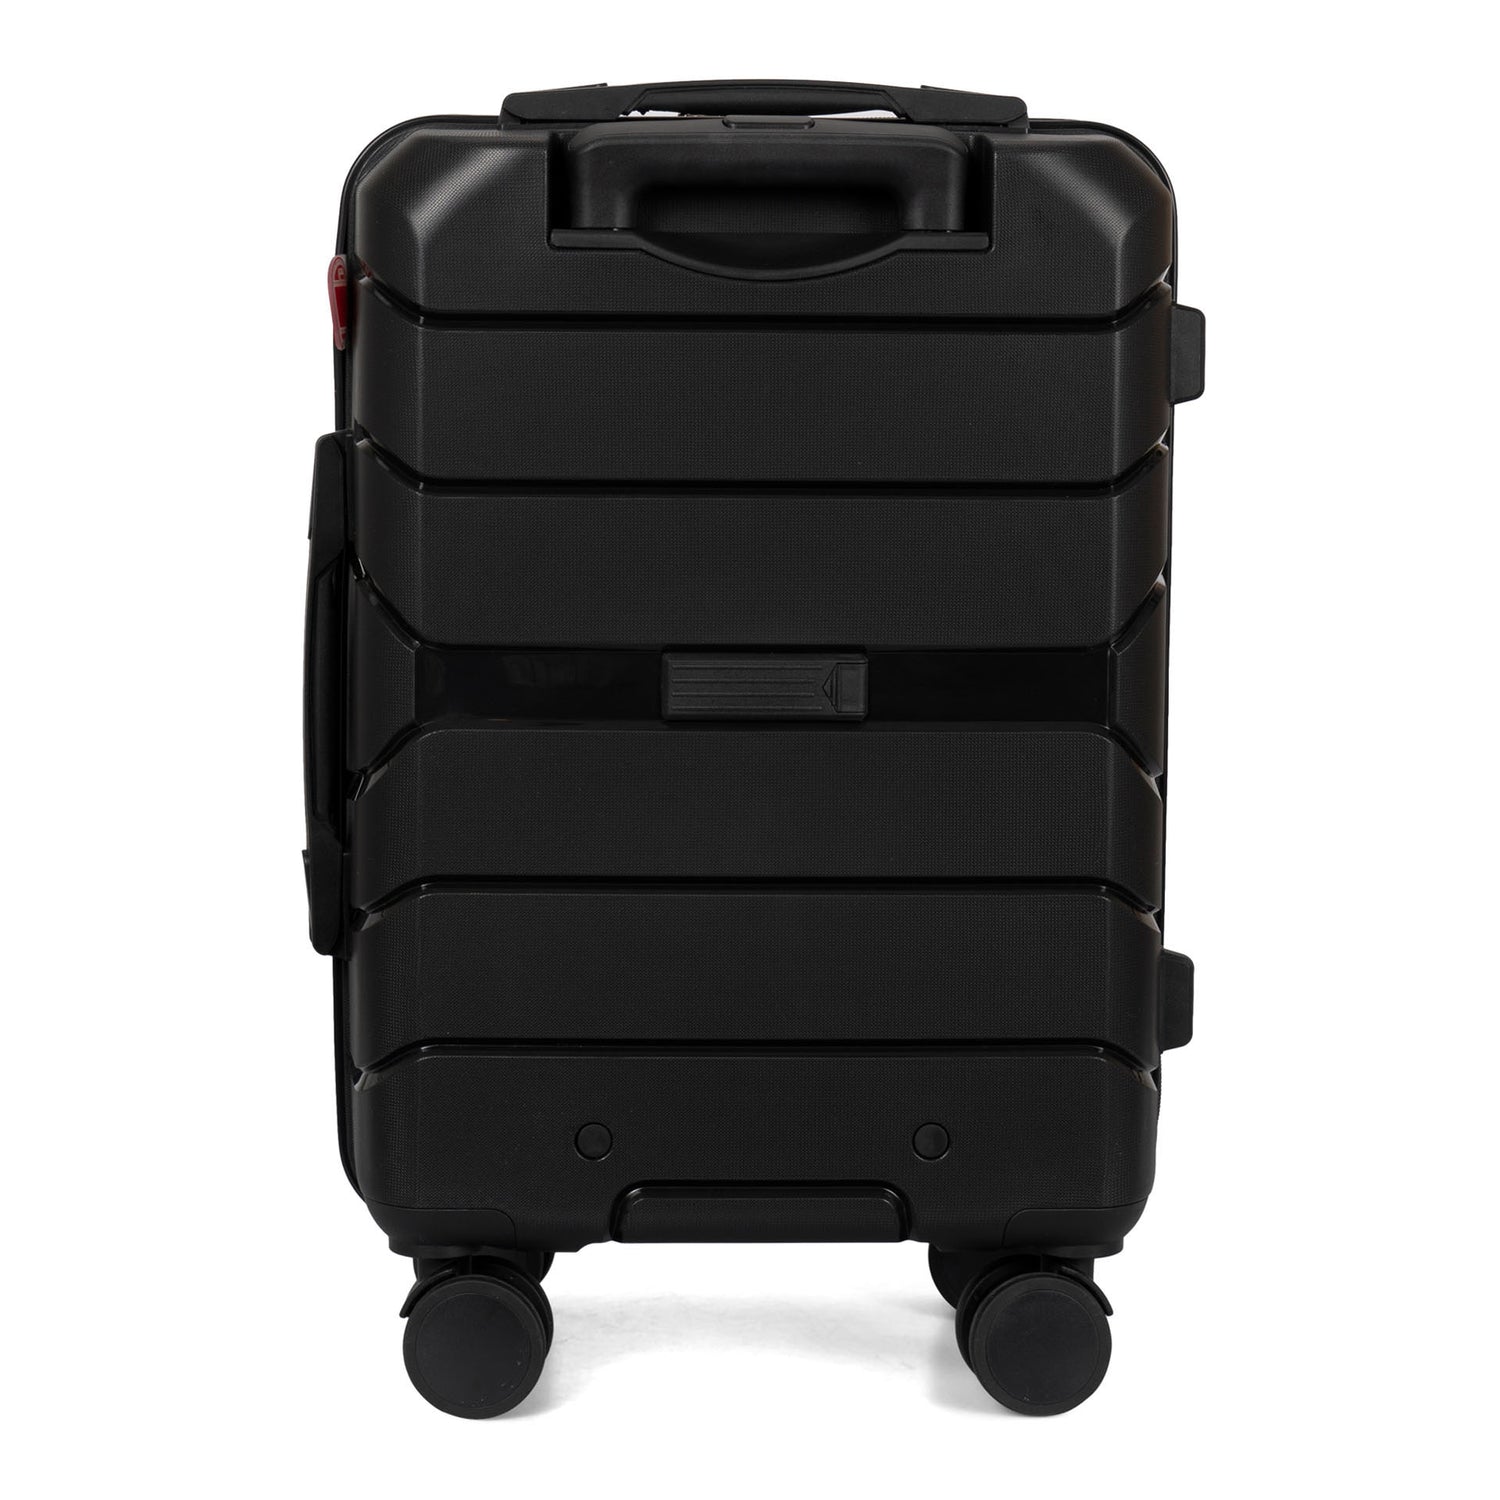 Back side view of a balck hard side luggage called Altitude designed by Air Canada sold at Bentley, showcasing its resistant shell texture.